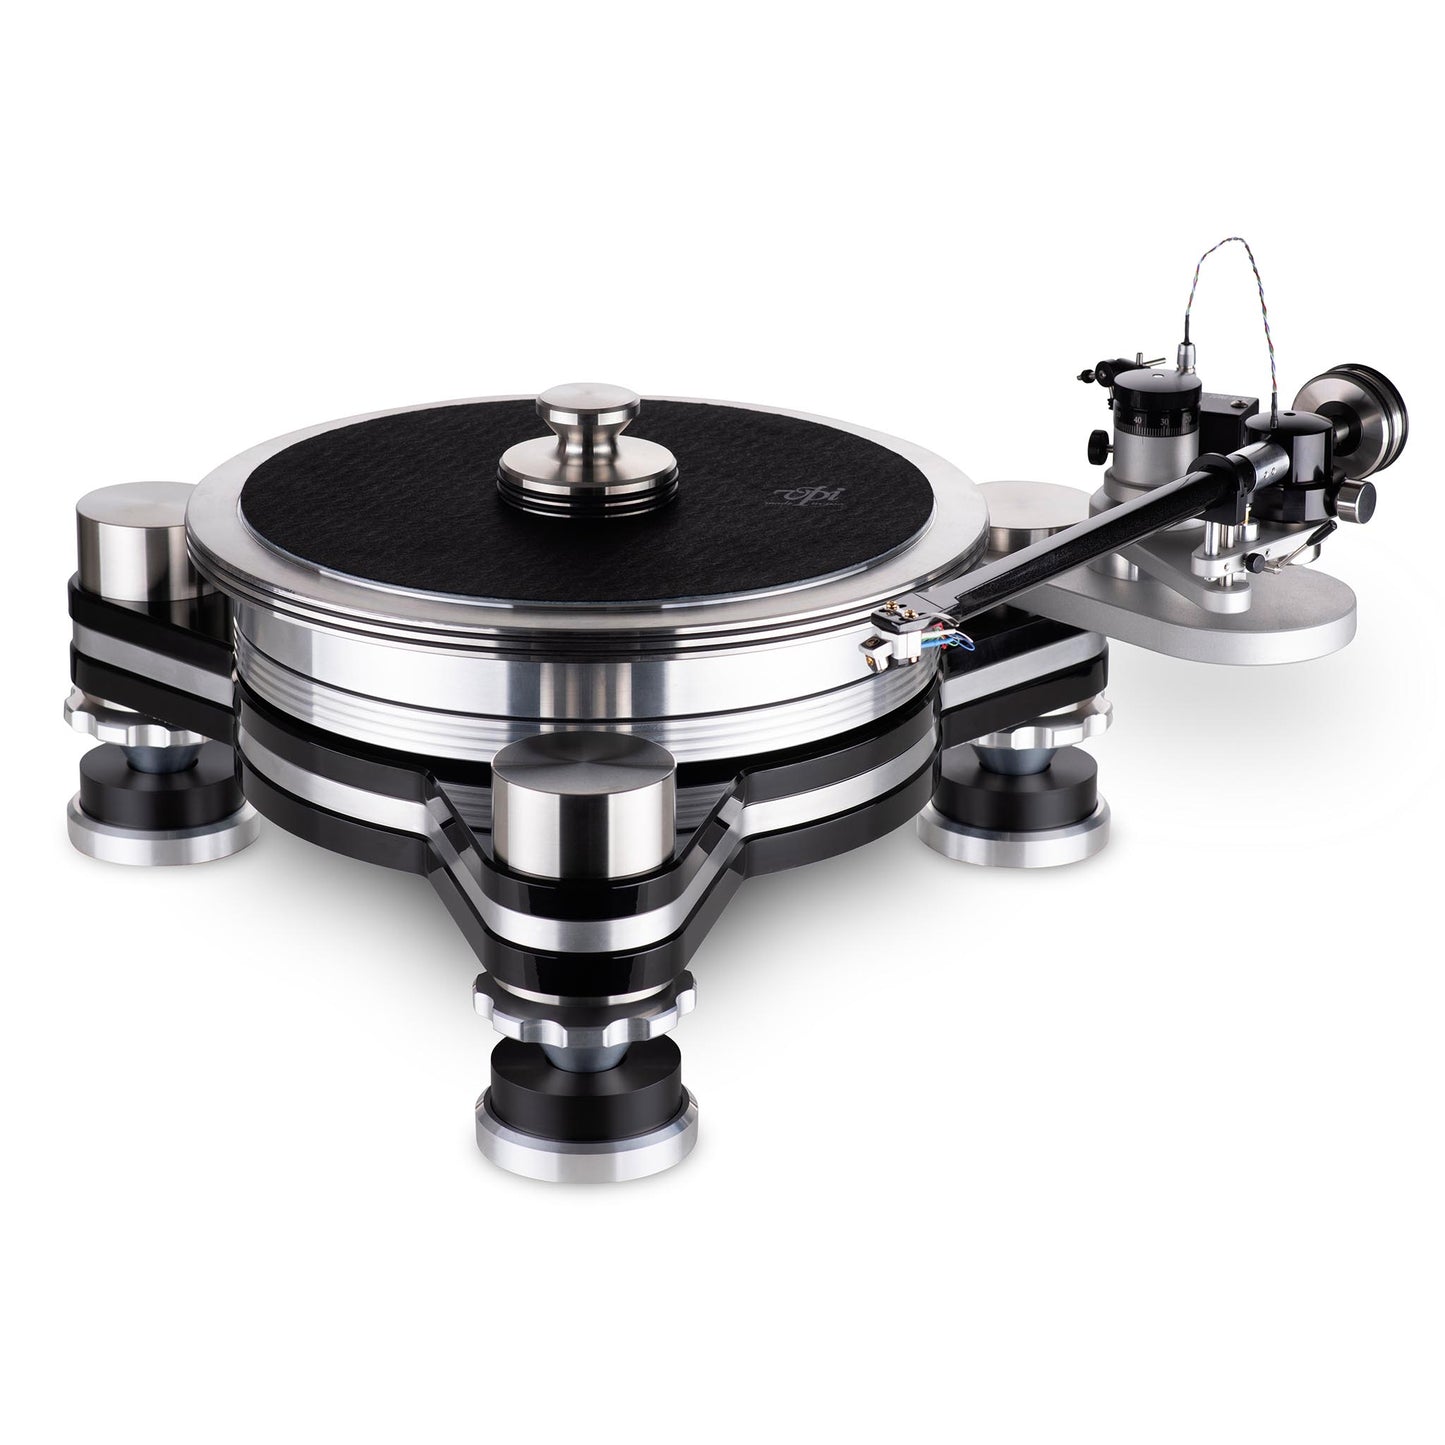 VPI Avenger Reference with Fatboy 12" Gimbal Tonearm & Magnetic Drive Platter